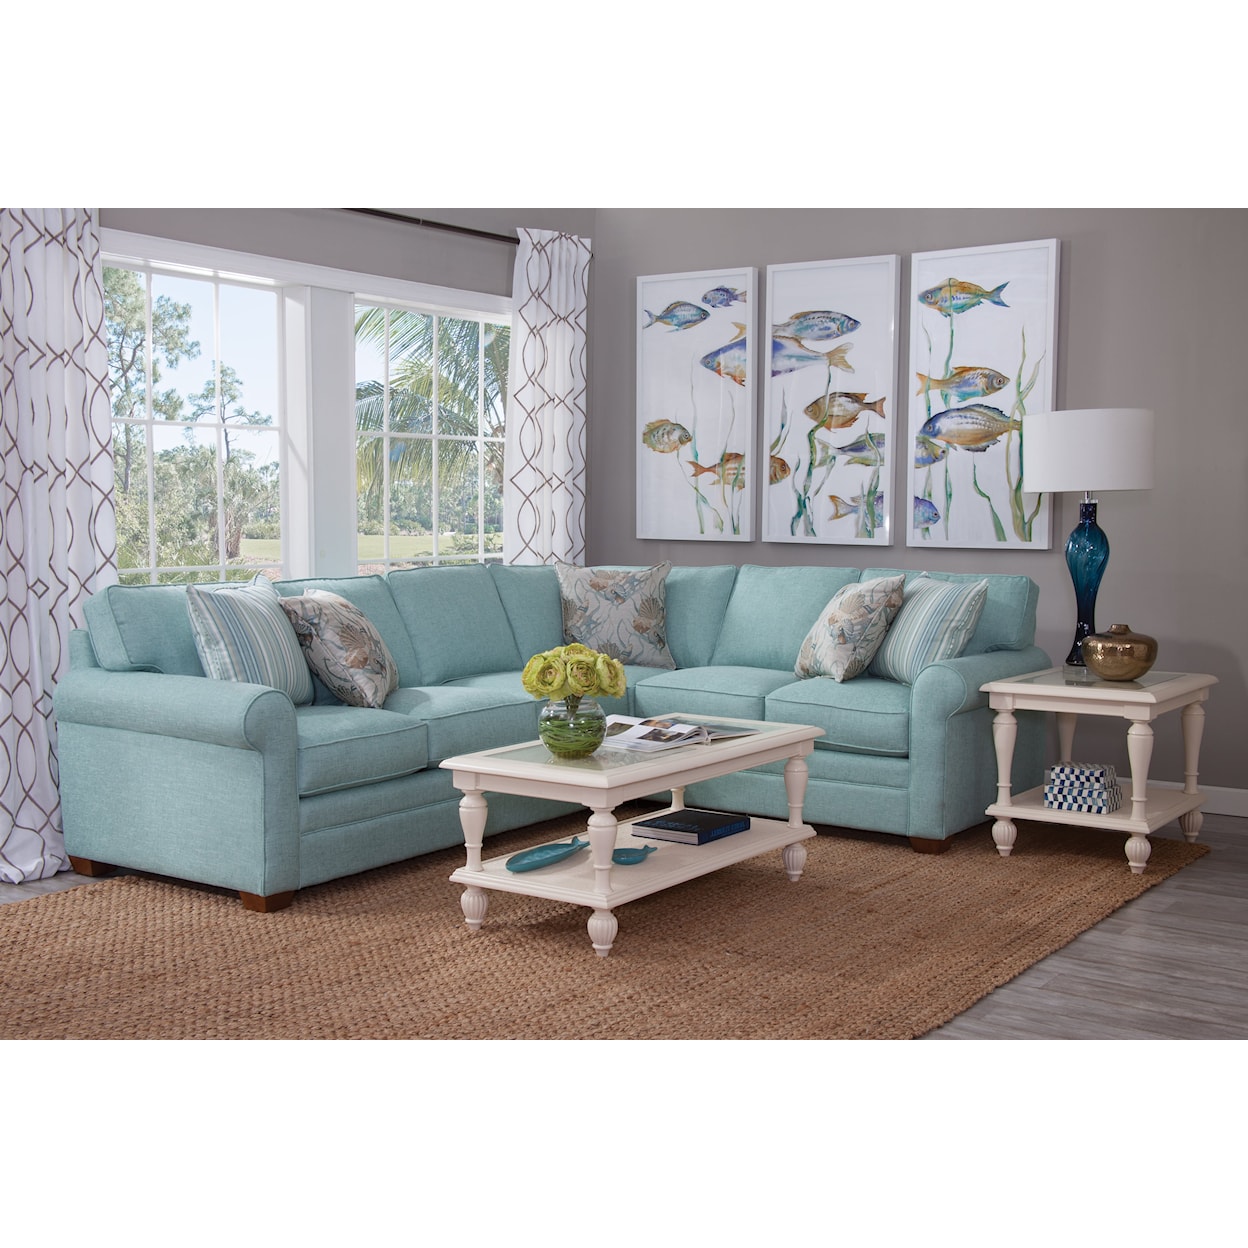 Braxton Culler Bedford 2-Piece Sectional Sofa